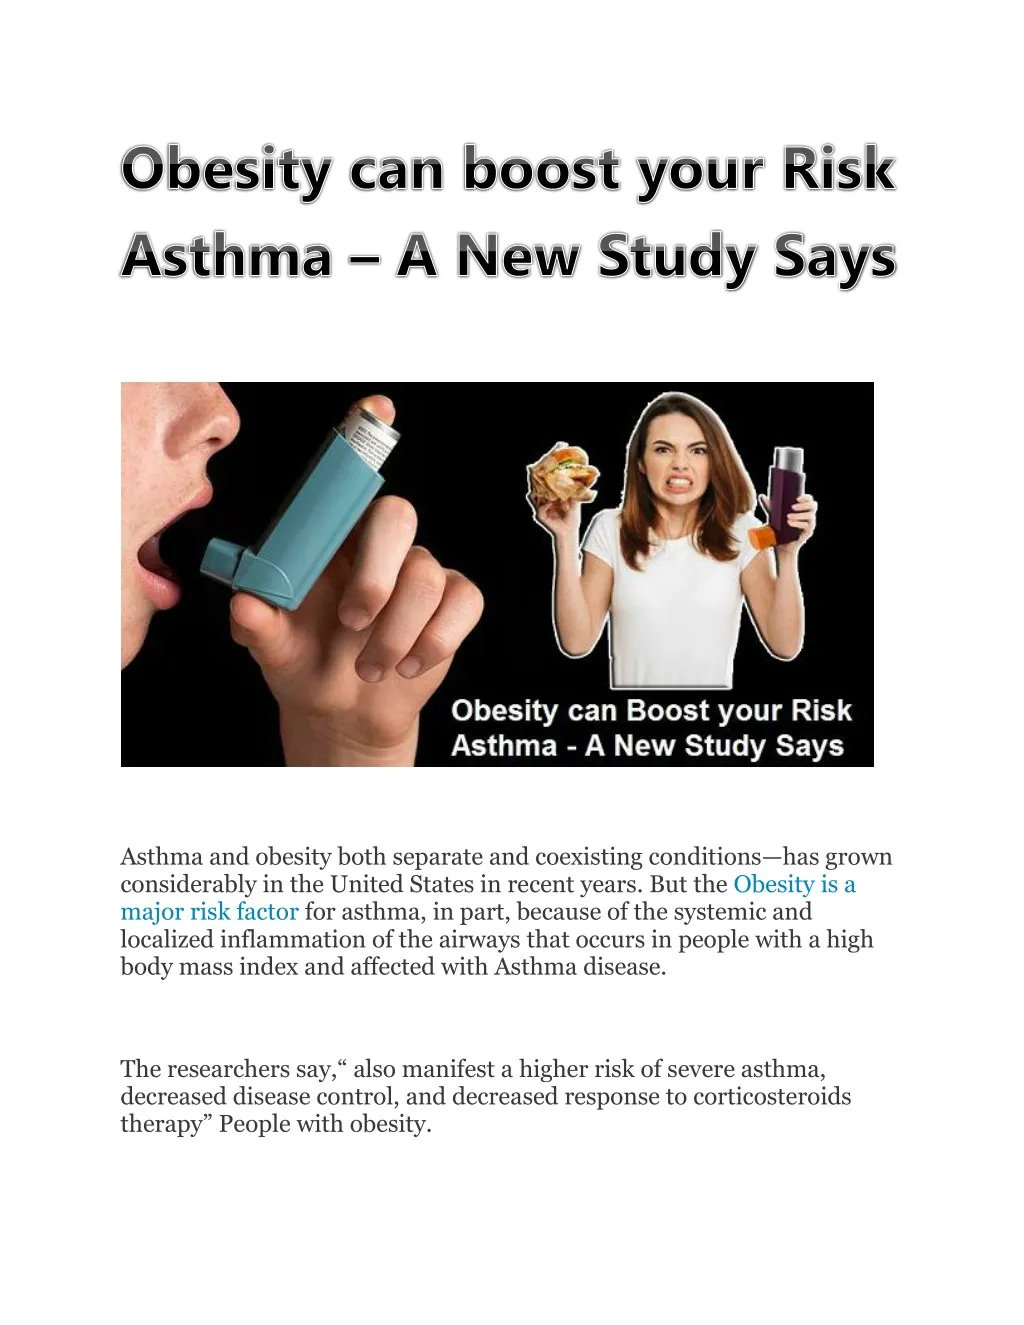 asthma and obesity both separate and coexisting